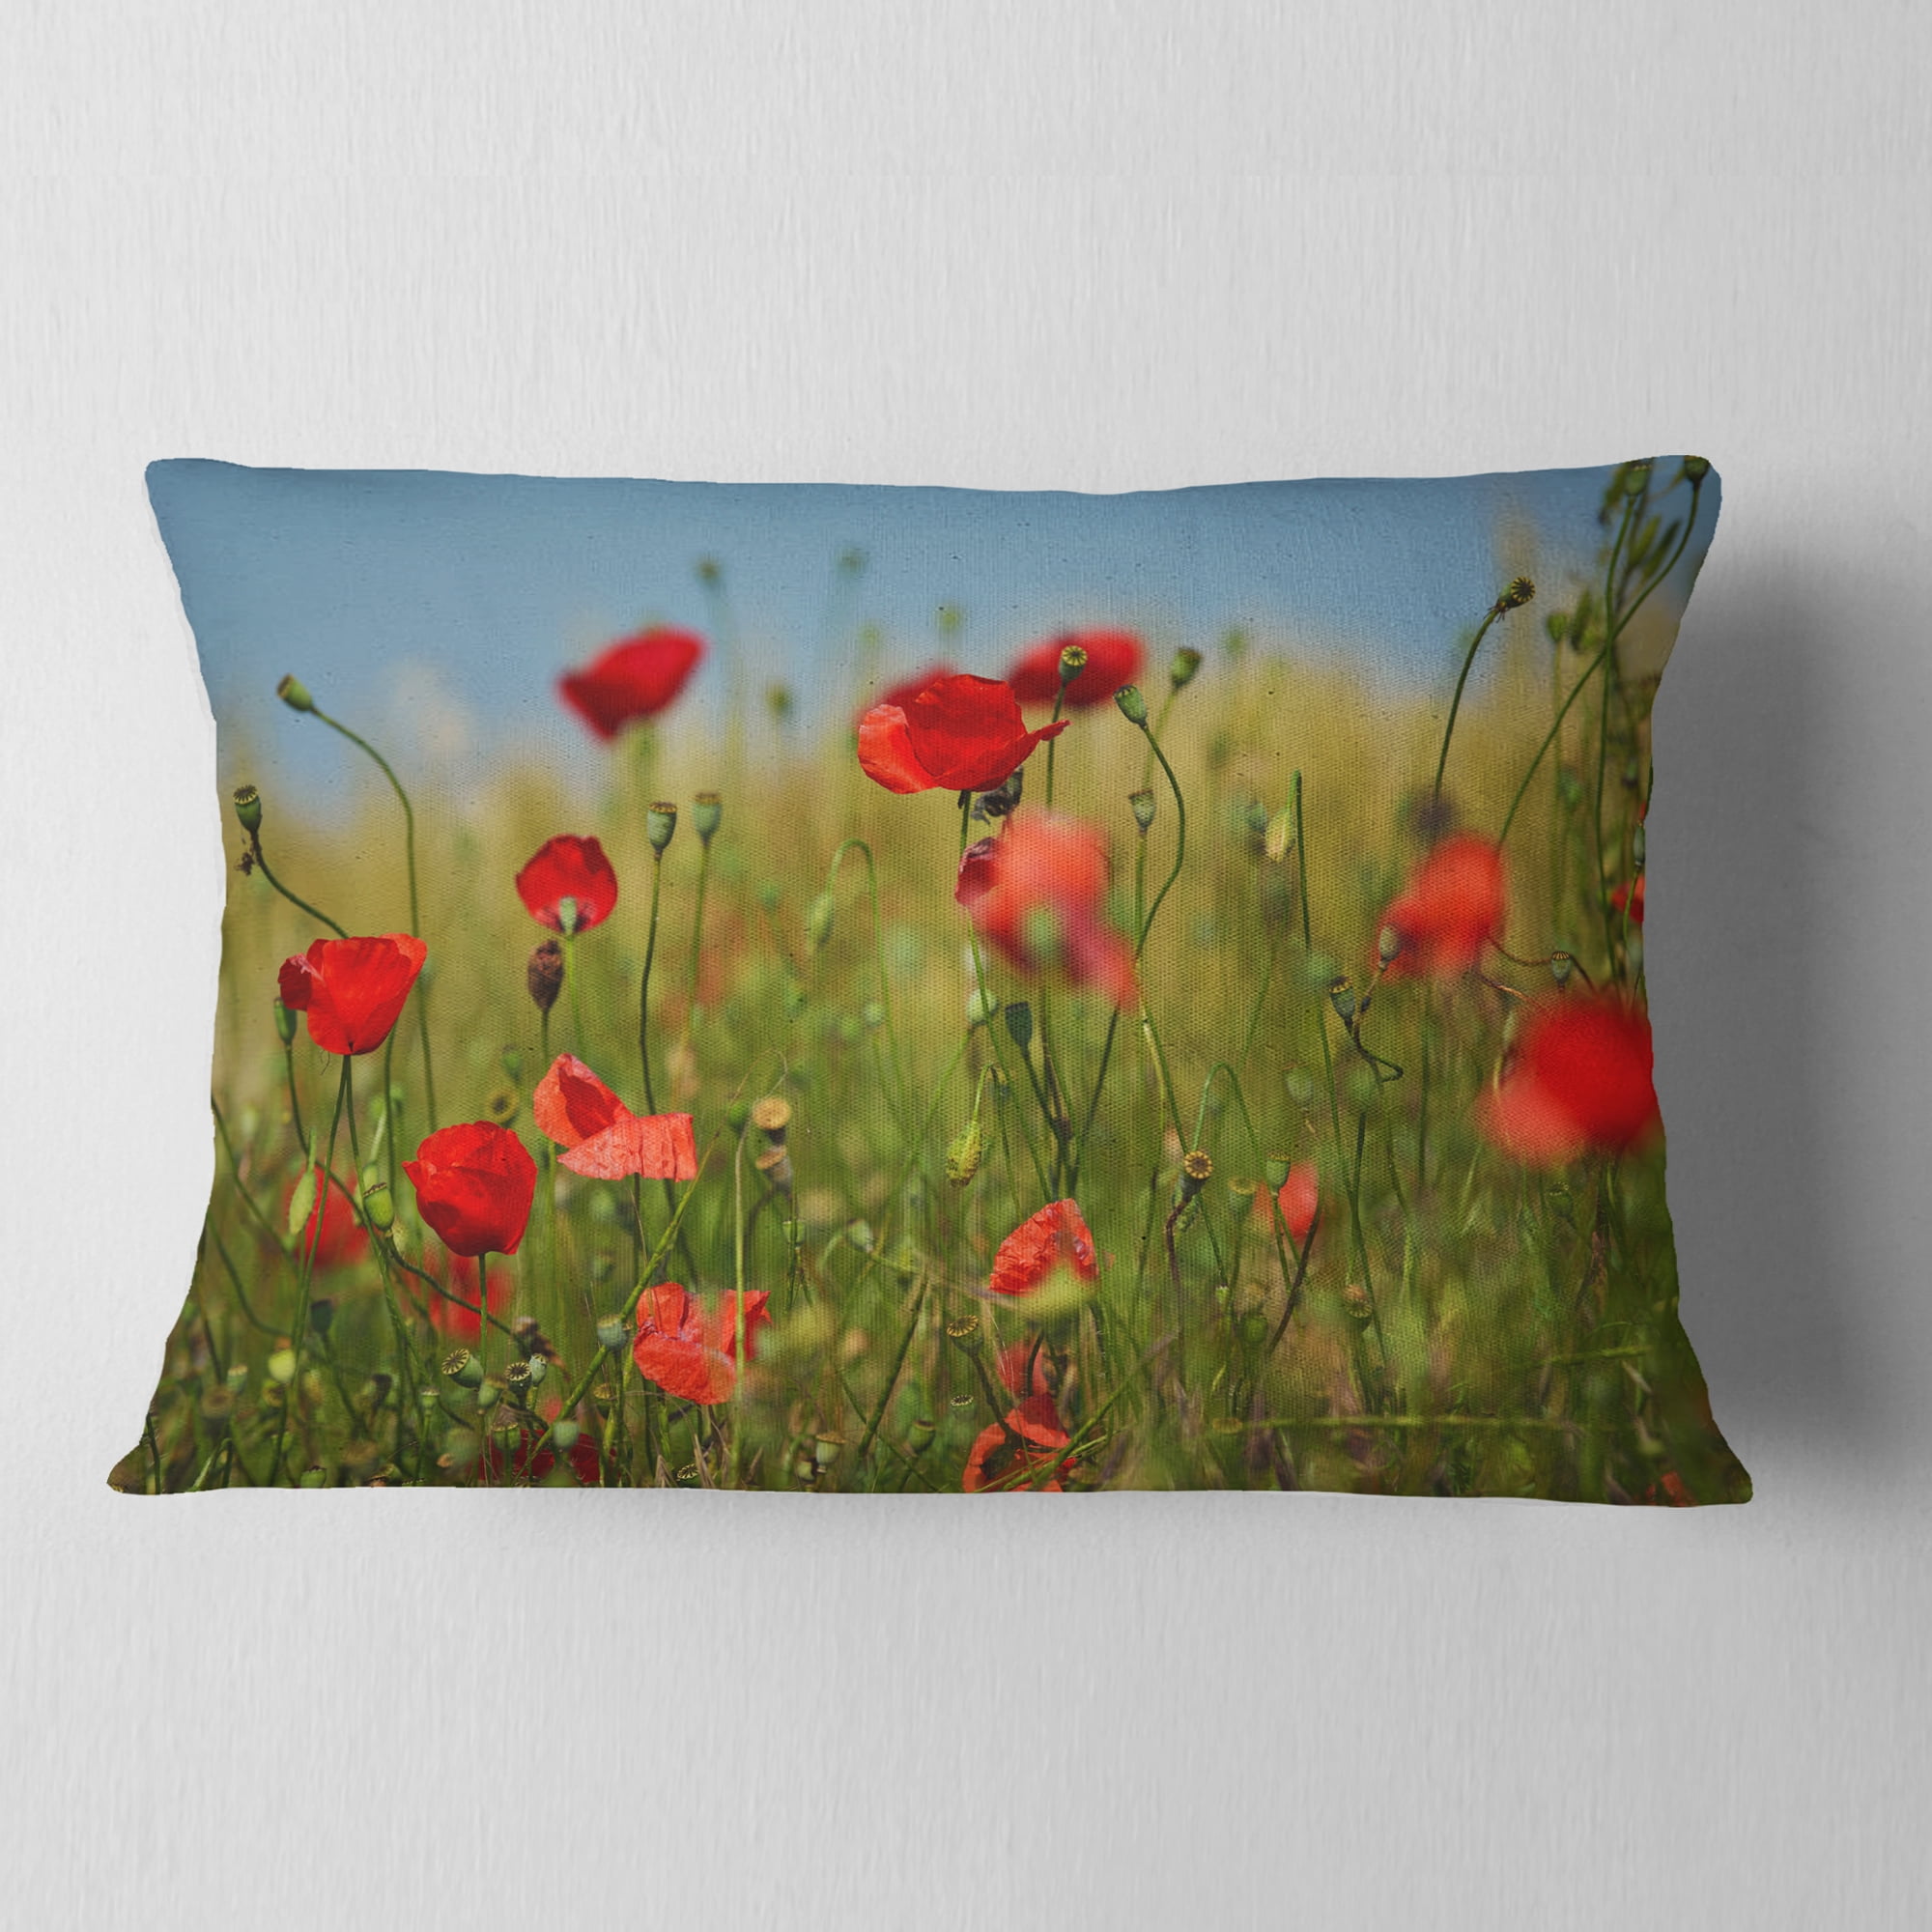 16 Designart CU13088-16-16-C Wild Poppy Flowers in Green Garden Floral Round Cushion Cover for Living Room Sofa Throw Pillow